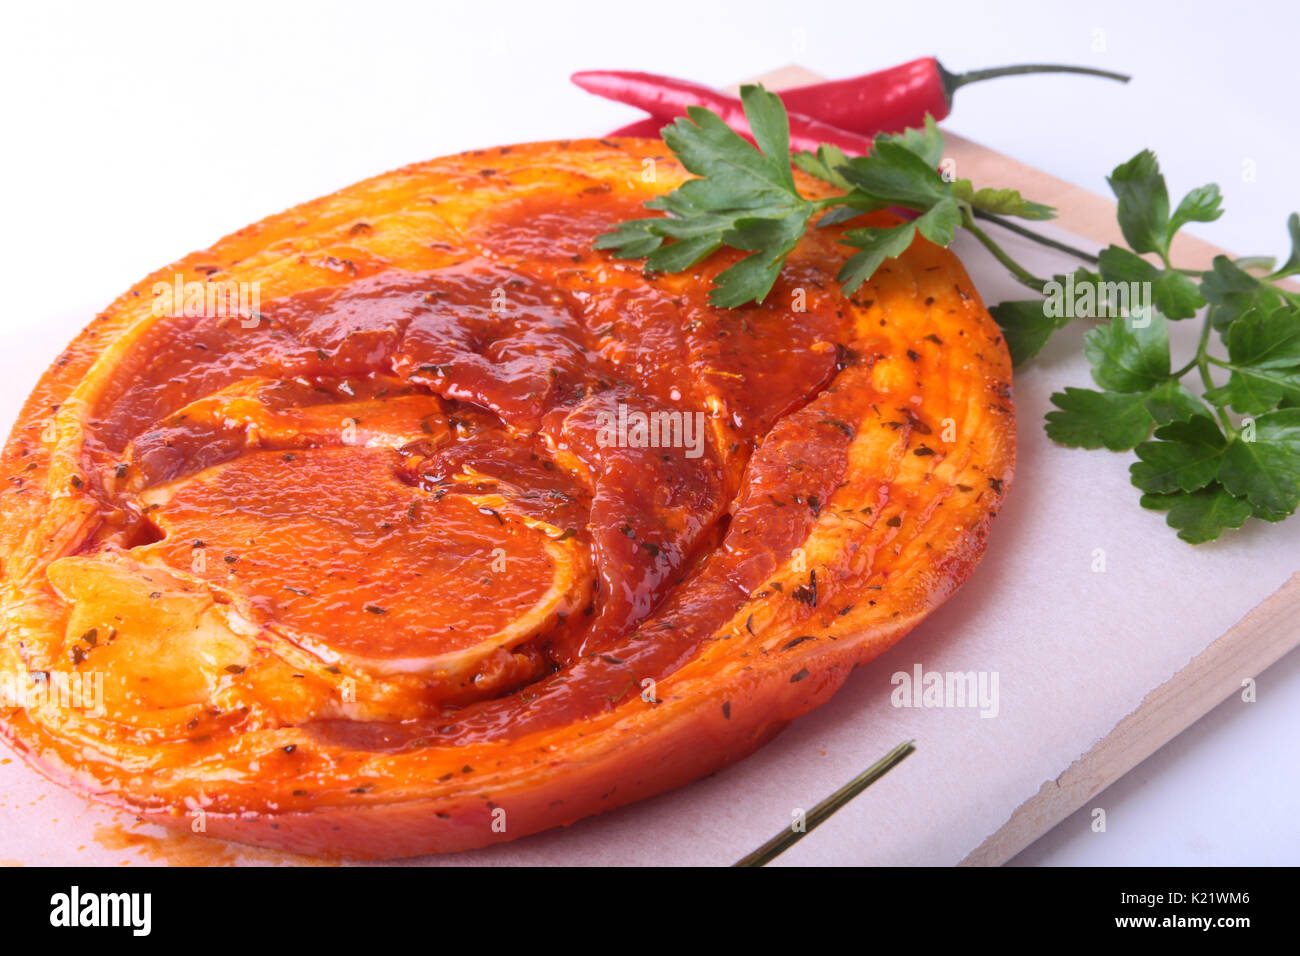 Raw Pork ham with spices, parsley leaves and chilli ready for BBQ grilling isolated on white background. Stock Photo